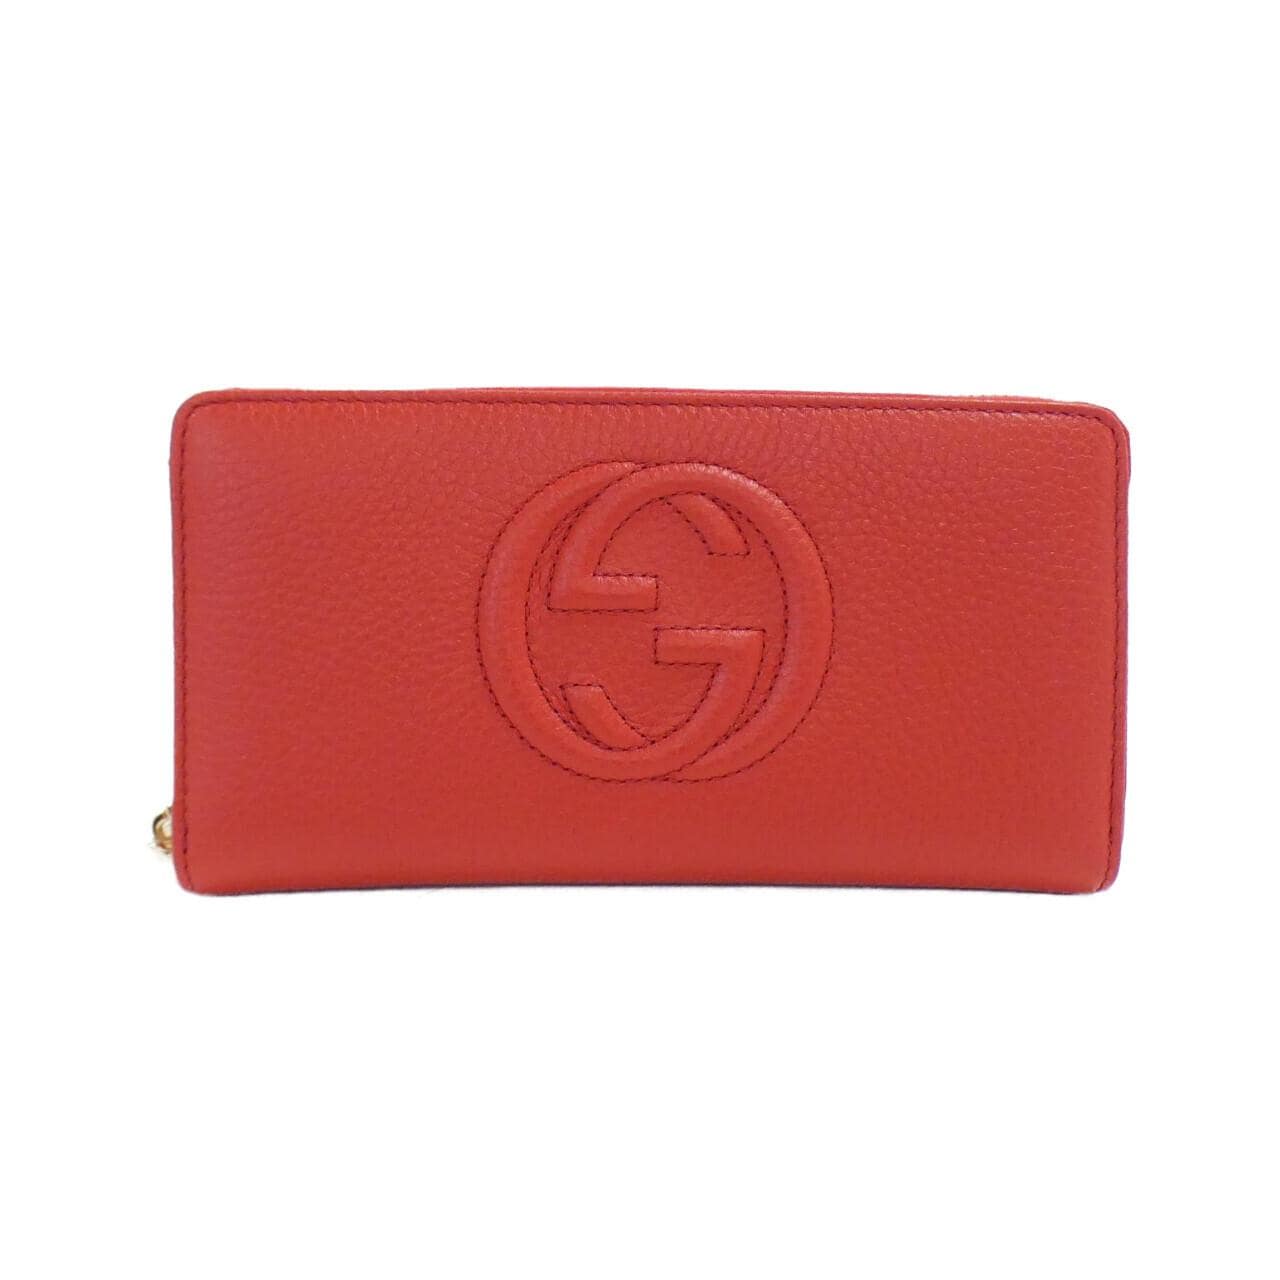 [BRAND NEW] Gucci 598187 A7M0G Wallet